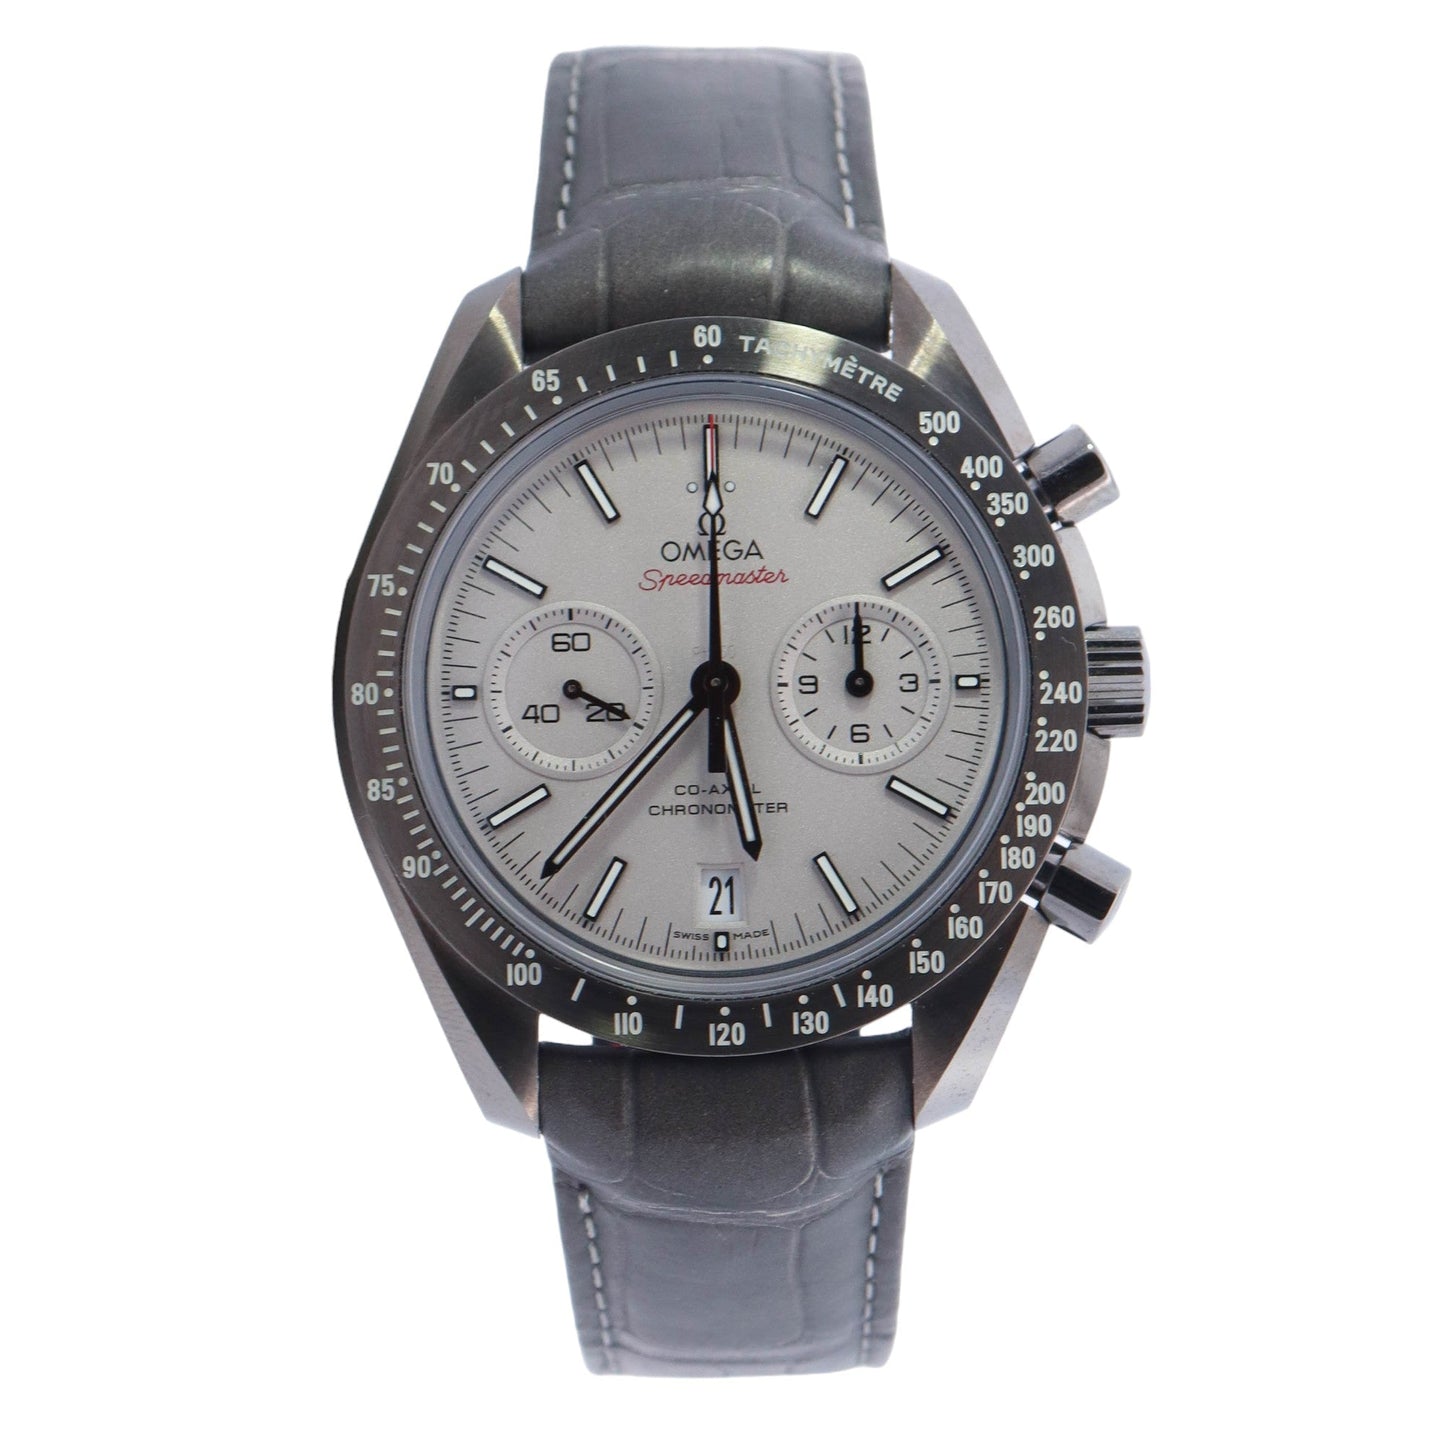 Omega Speedmaster "Grey Side Of The Moon" Ceramic Light Grey Chronograph Dial Watch Reference# 311.93.44.51.99.002 - Happy Jewelers Fine Jewelry Lifetime Warranty